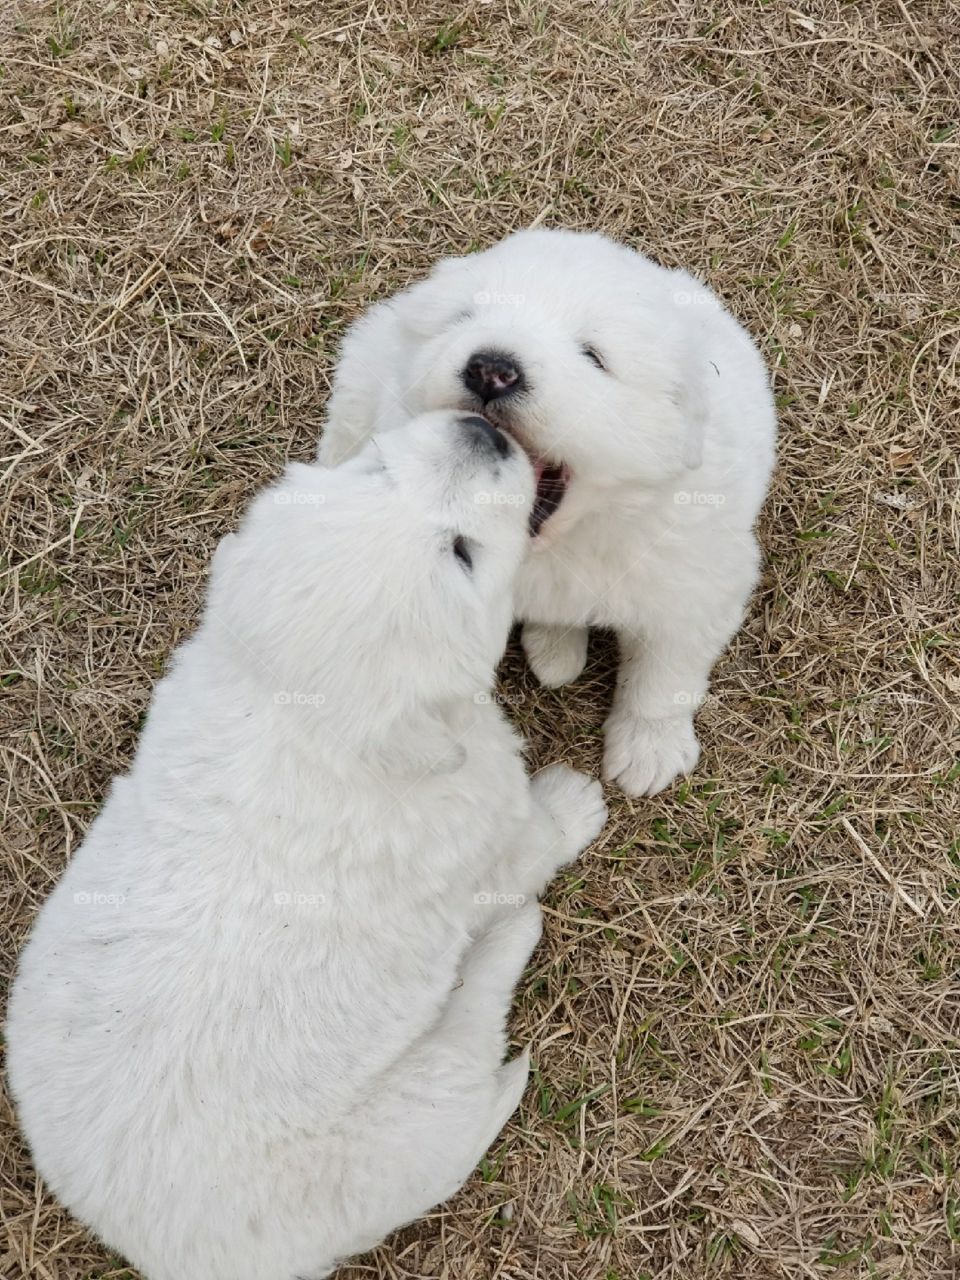 Playful pups! Young puppy love. Fluffy, sweet, precious and playful. 